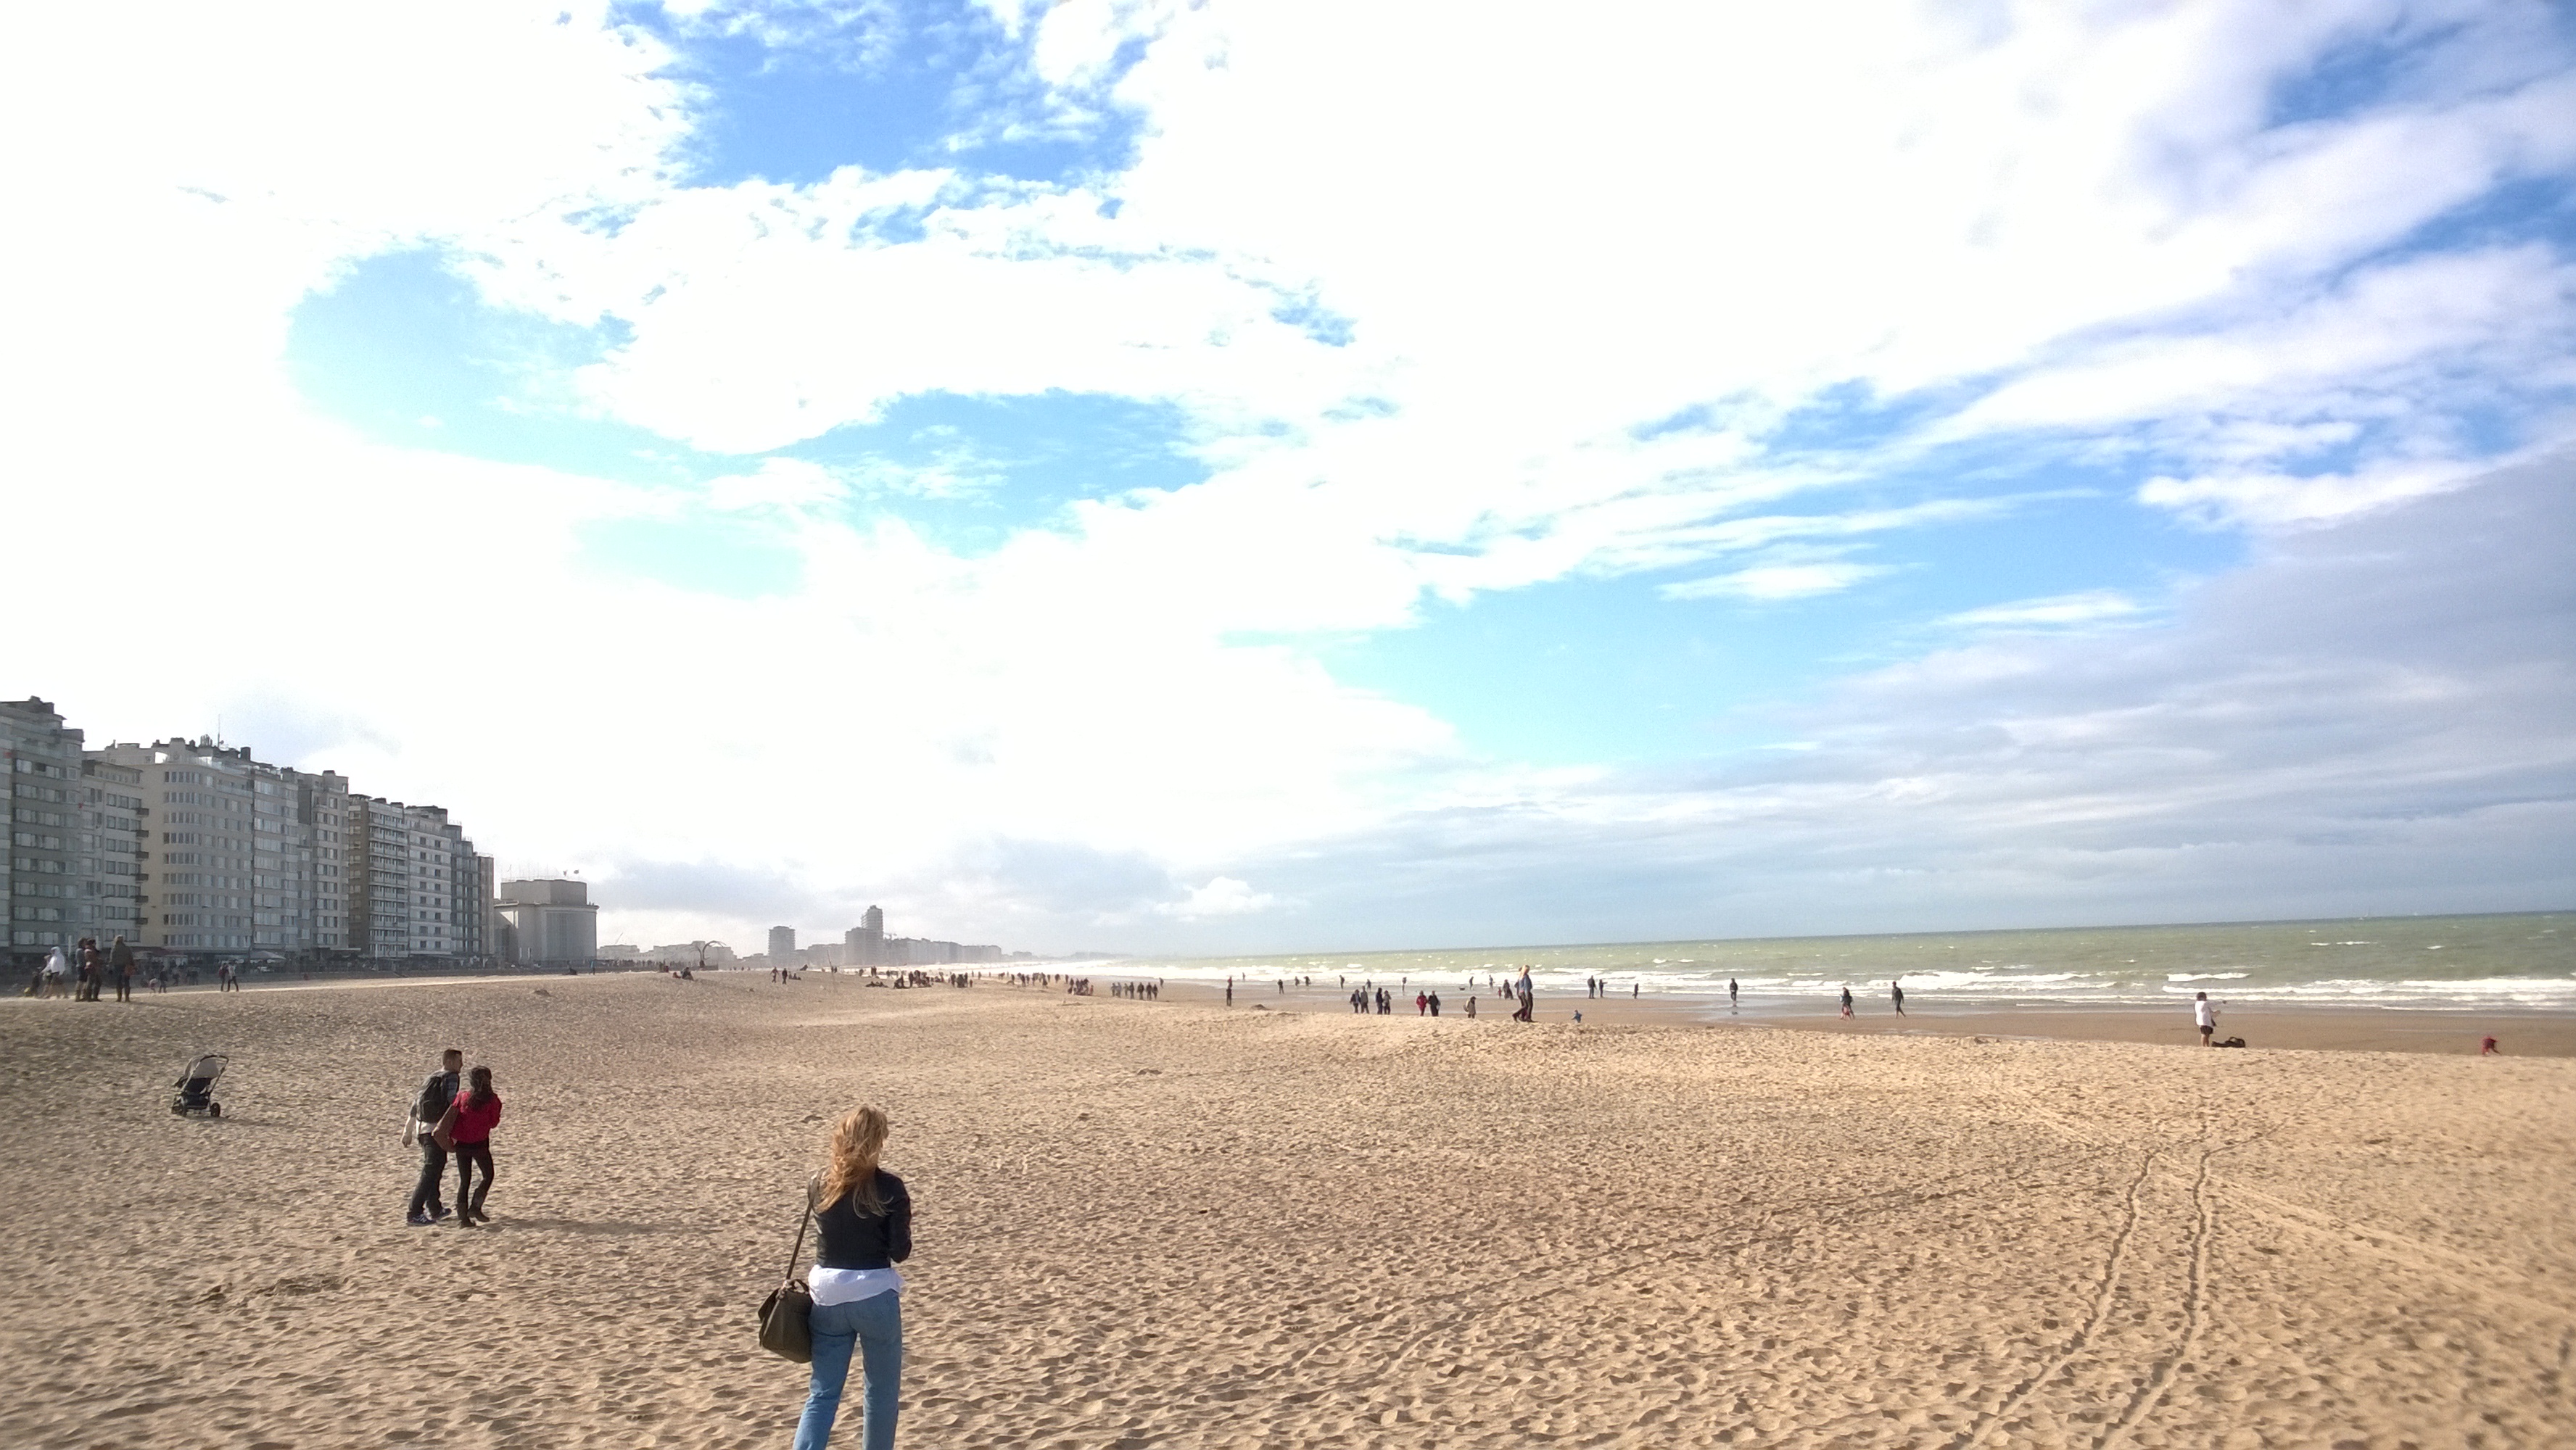 The beach in Oostende